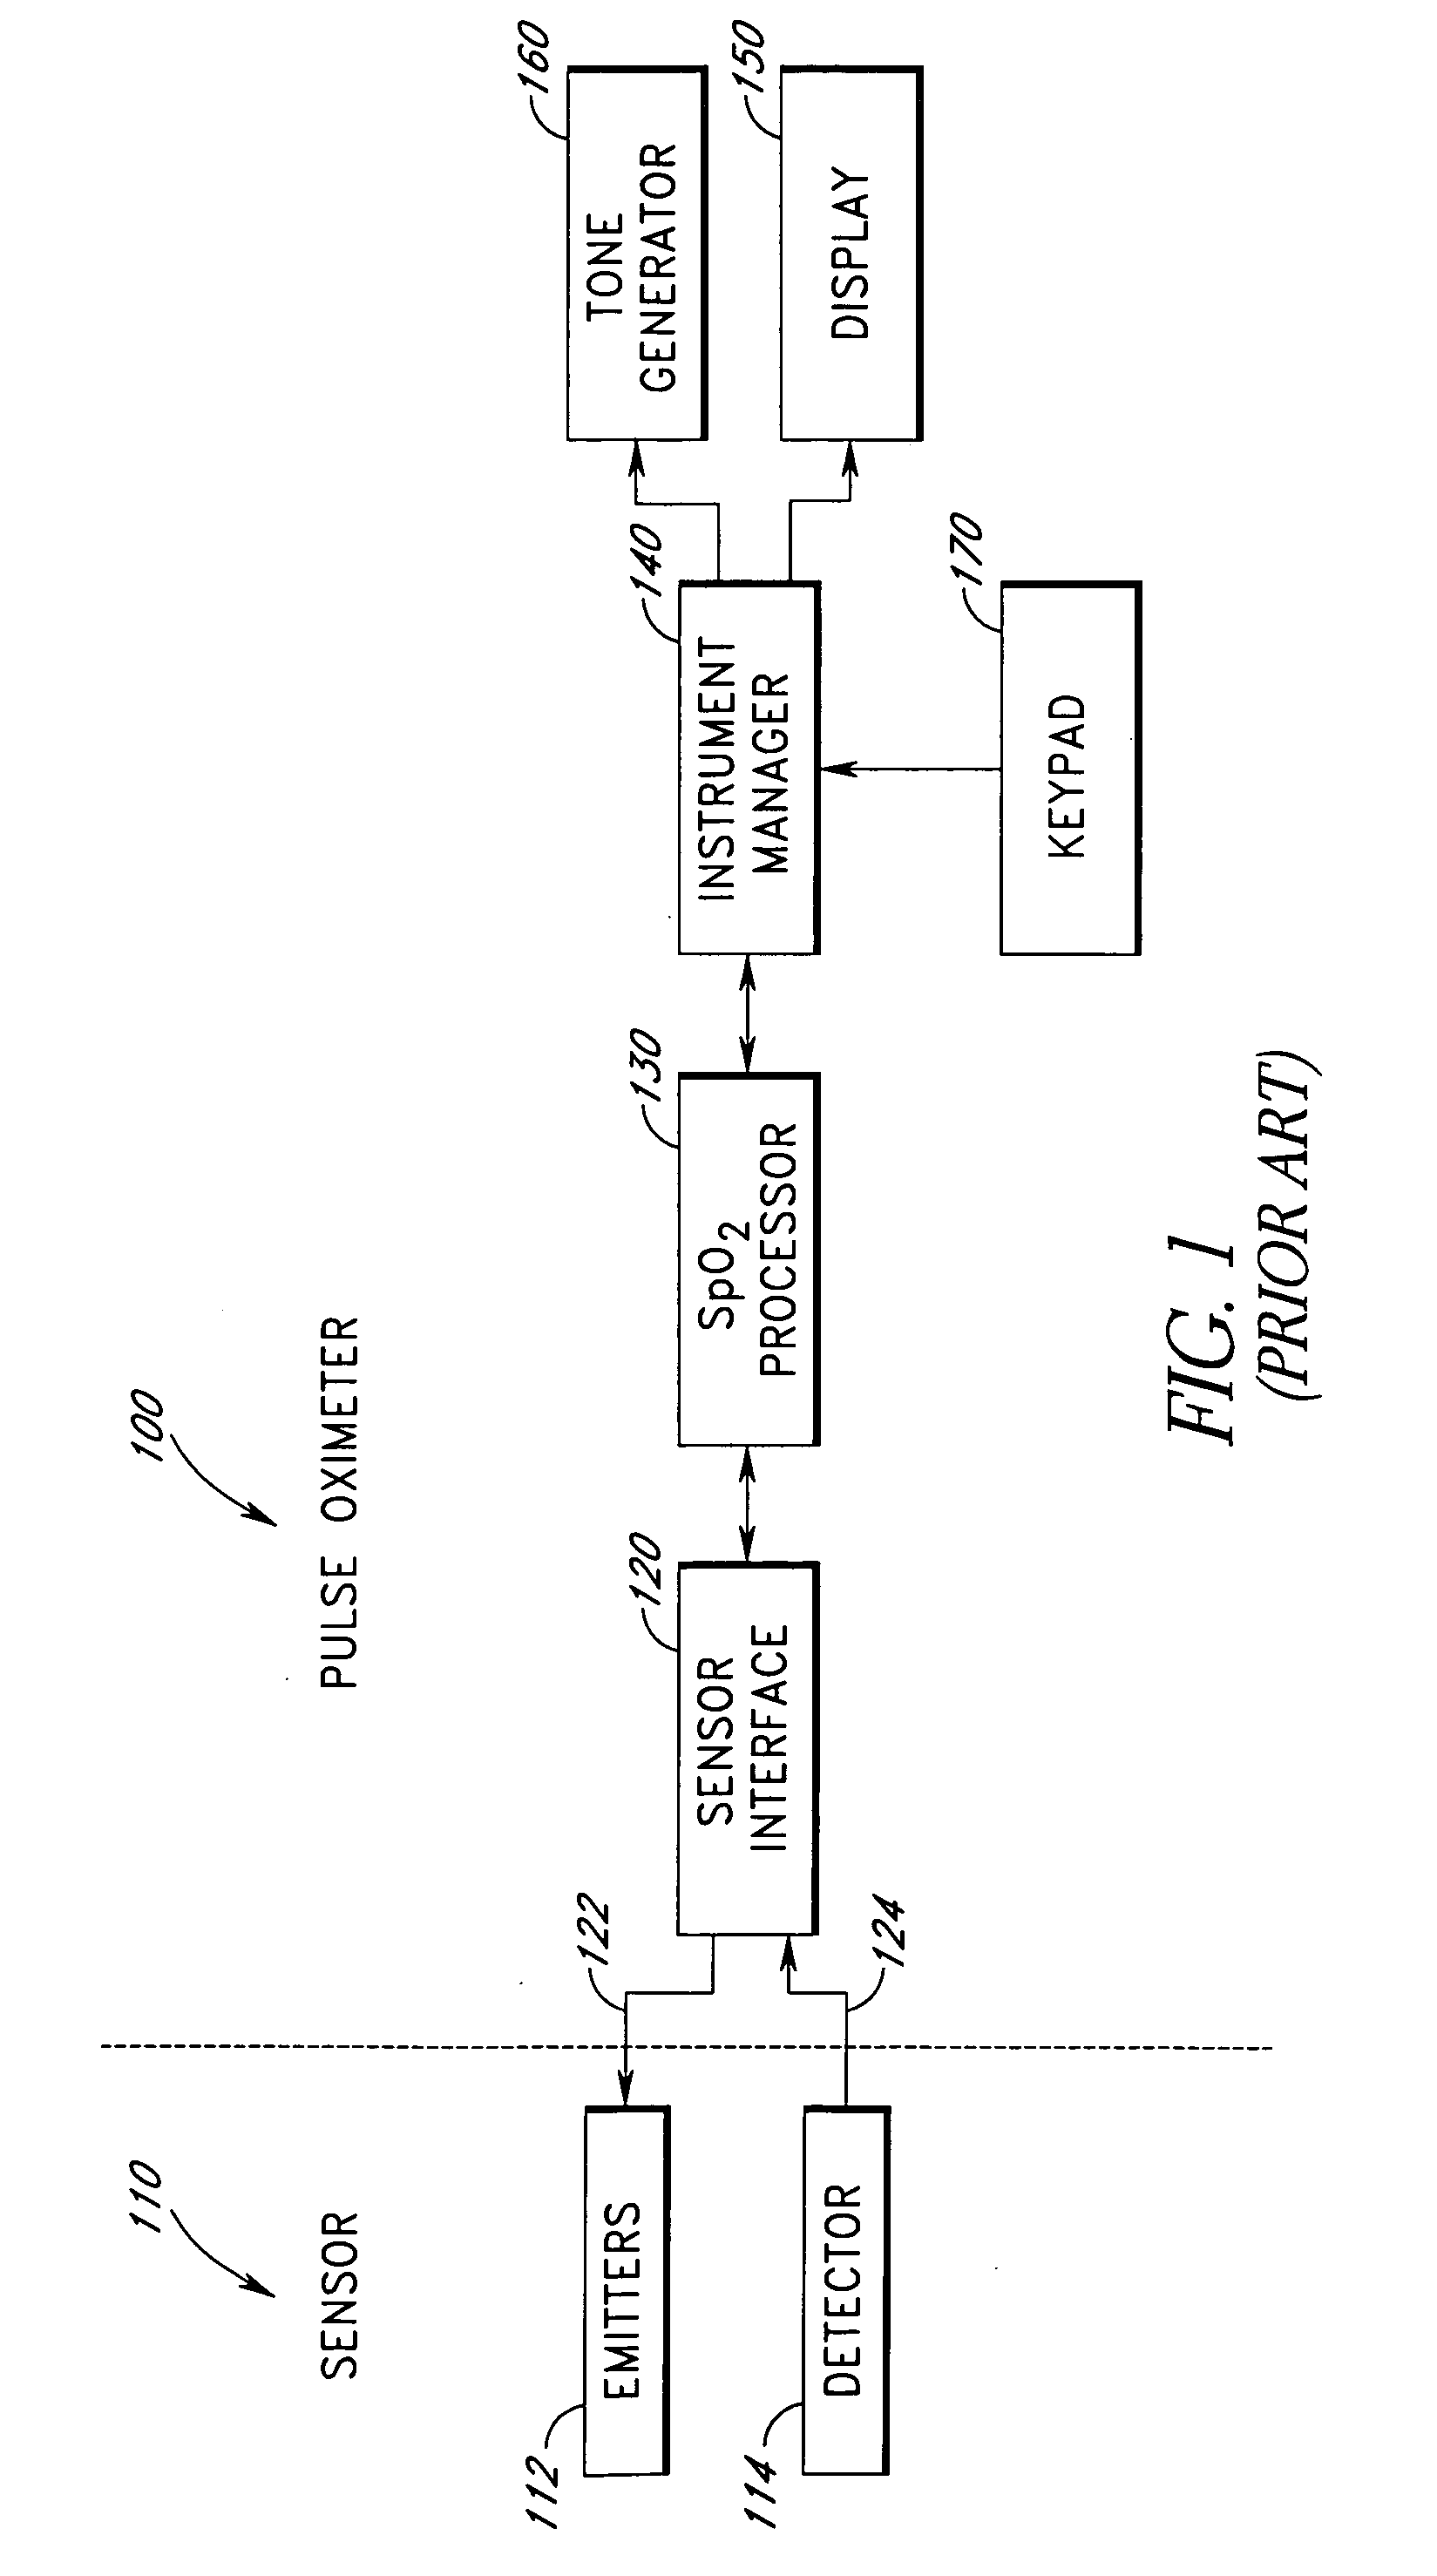 Systems and methods for acquiring calibration data usable in a pulse oximeter